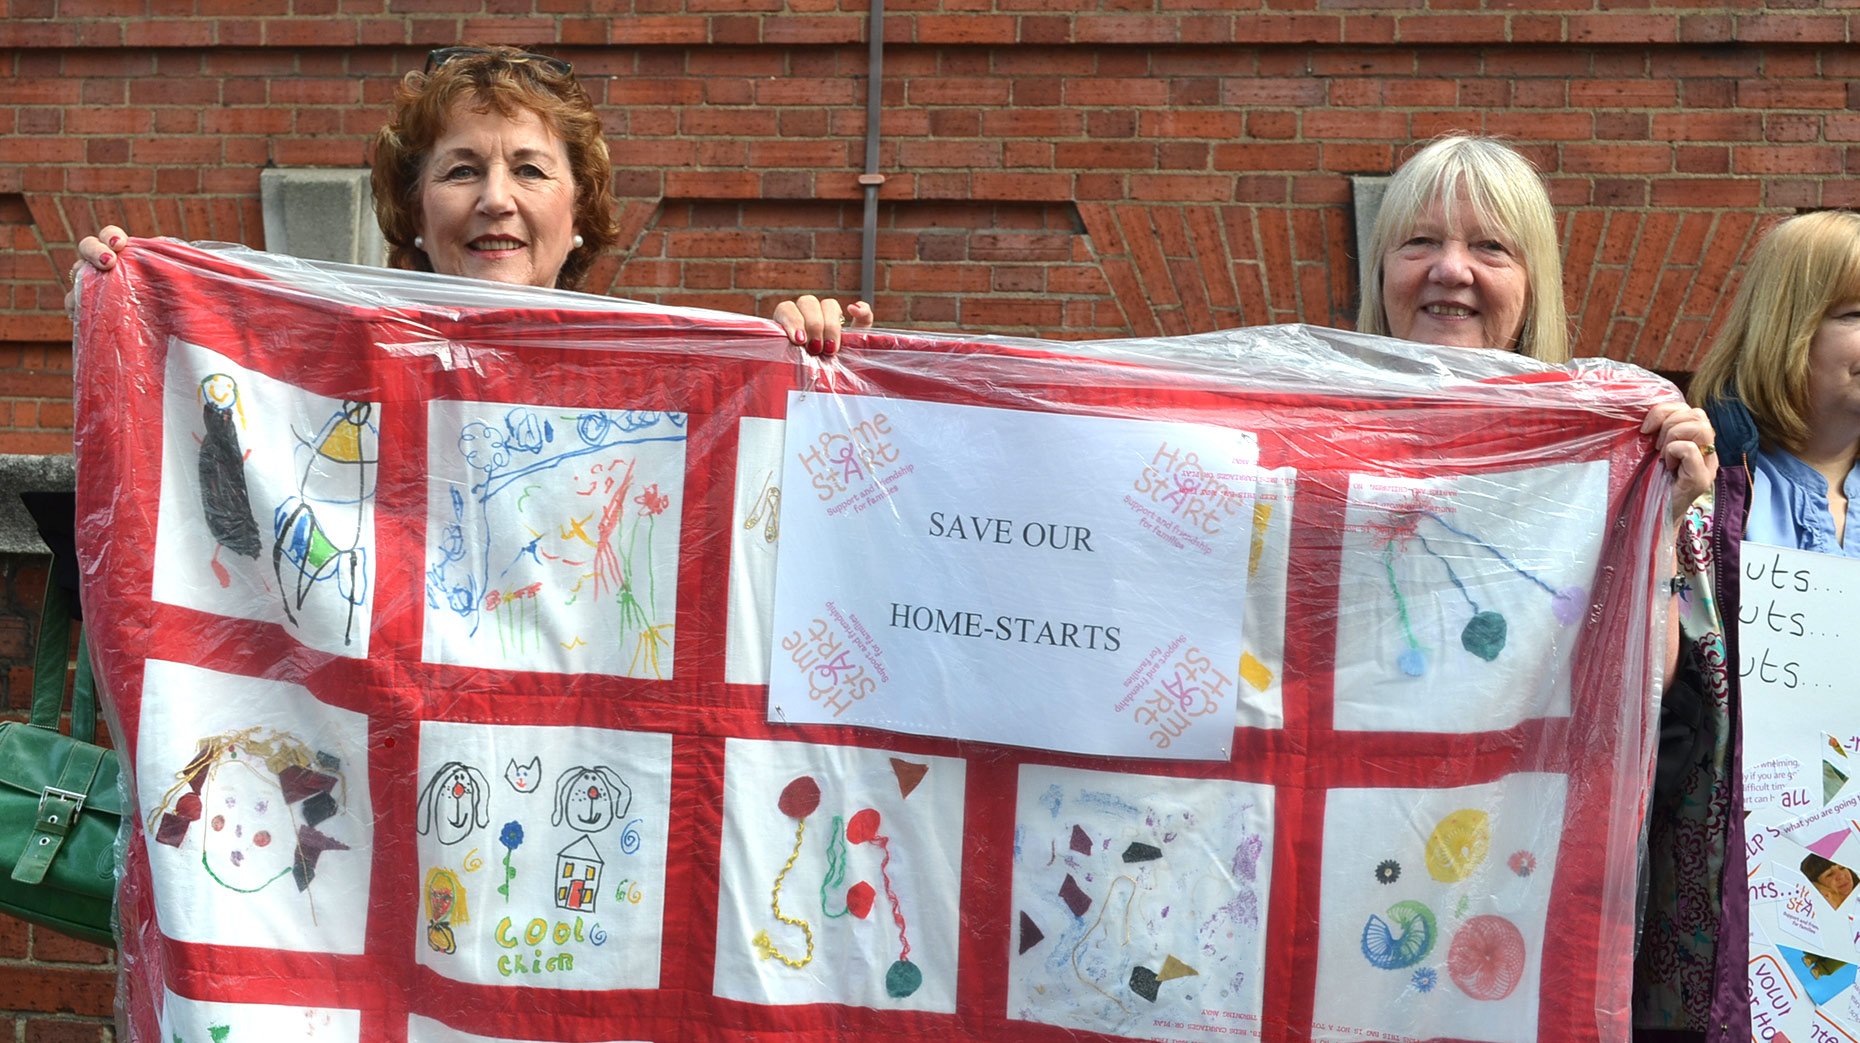 Linda Nixon and Christine Sharp from Home-Start brought with them art work by the children helped by the scheme. 